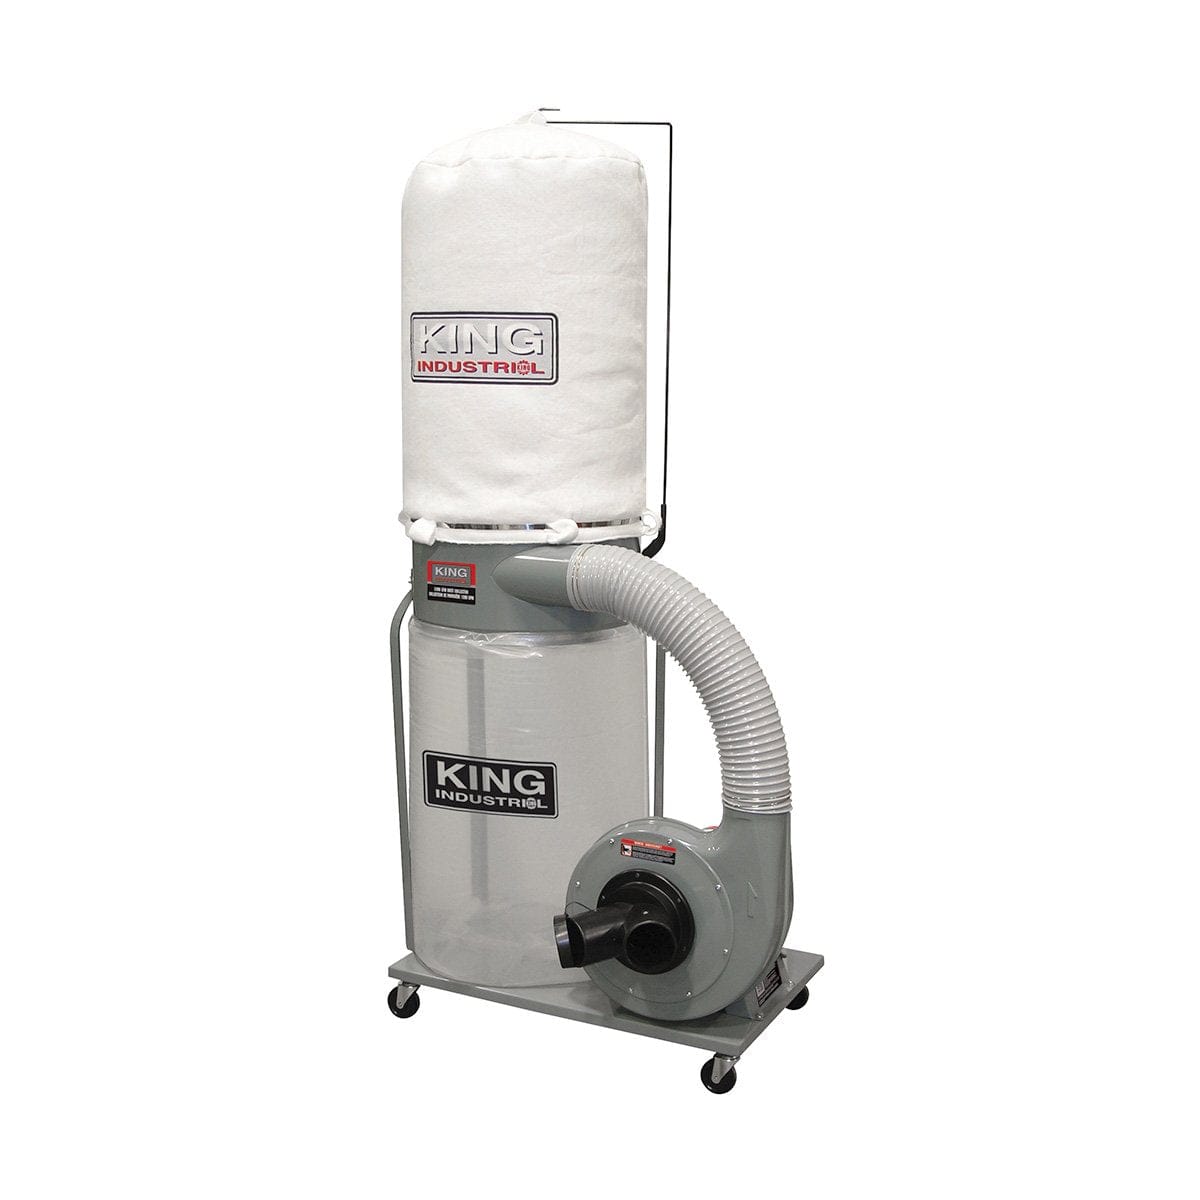 King Industrial KC-3105C Dust Collector 1200 CFM Dust Collector